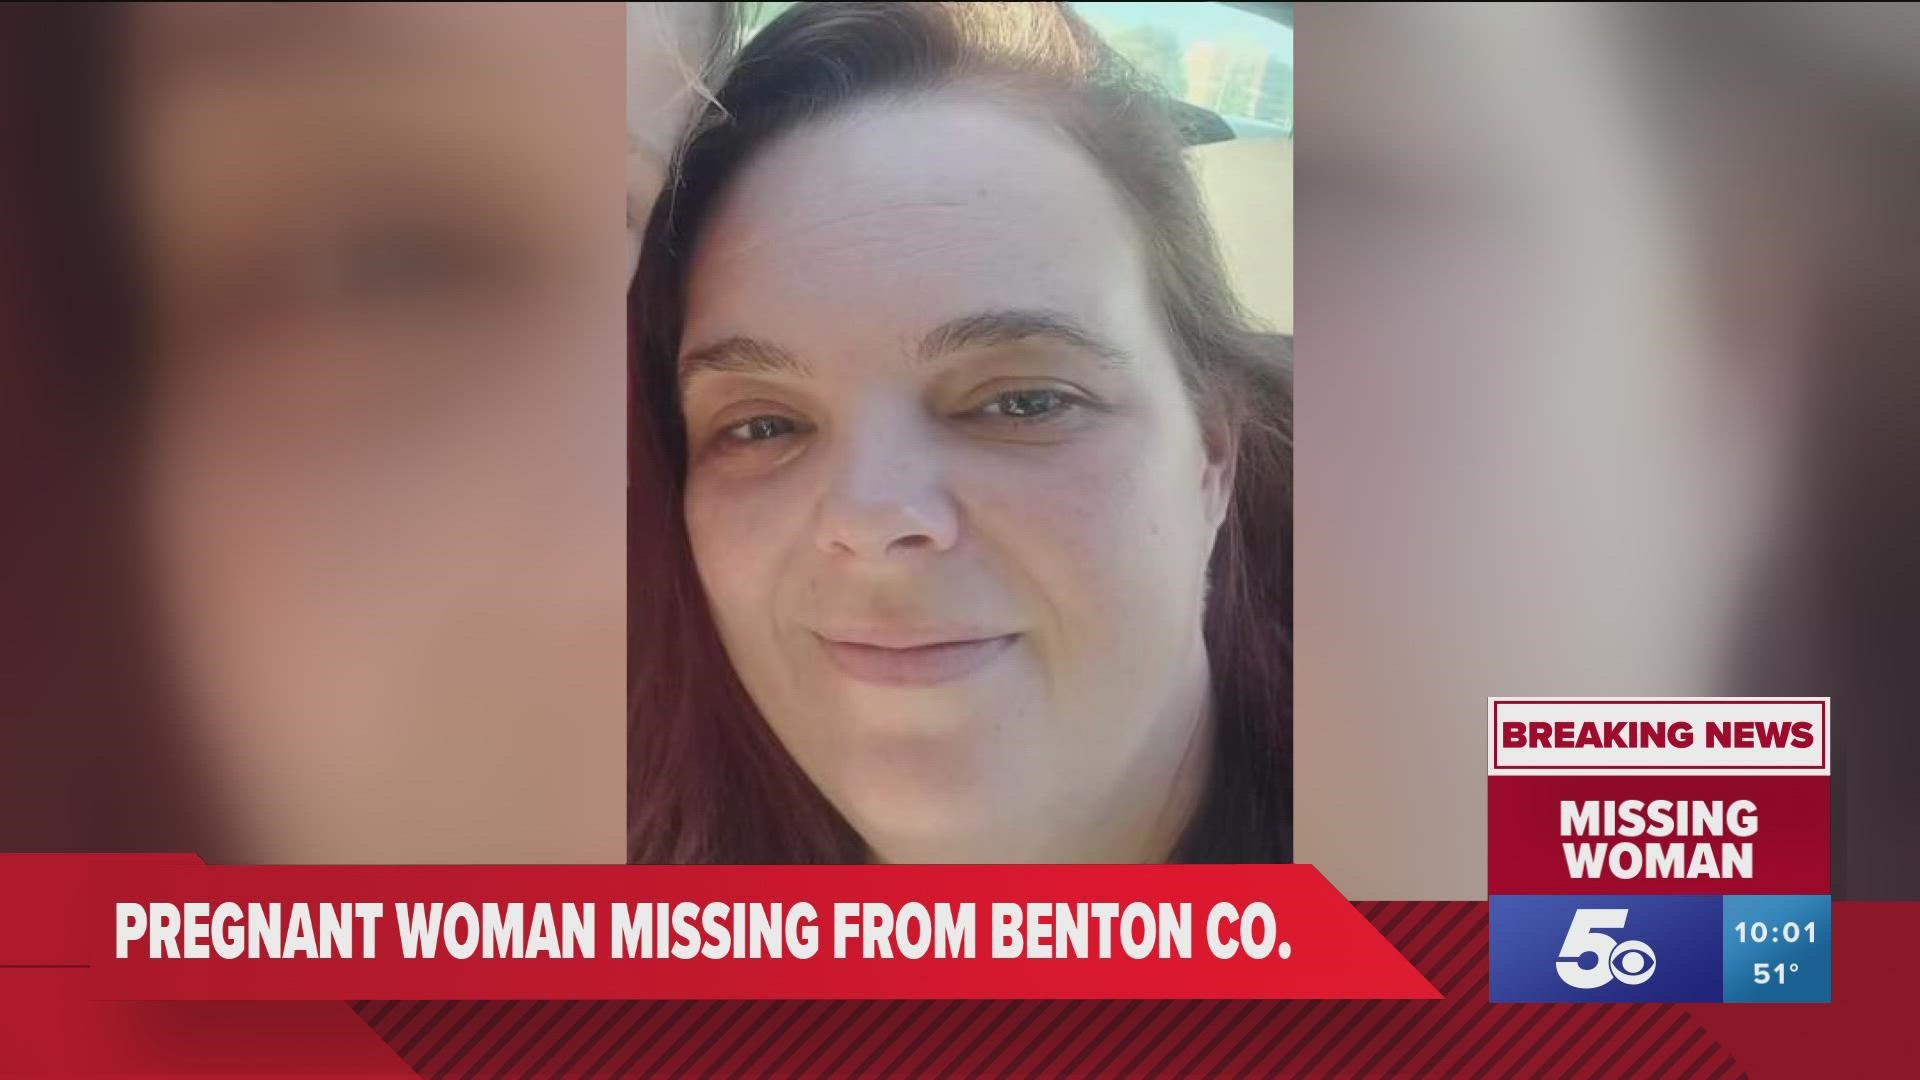 Benton Co Deputies Search For Missing Pregnant Woman Last Seen With Person She Met Online